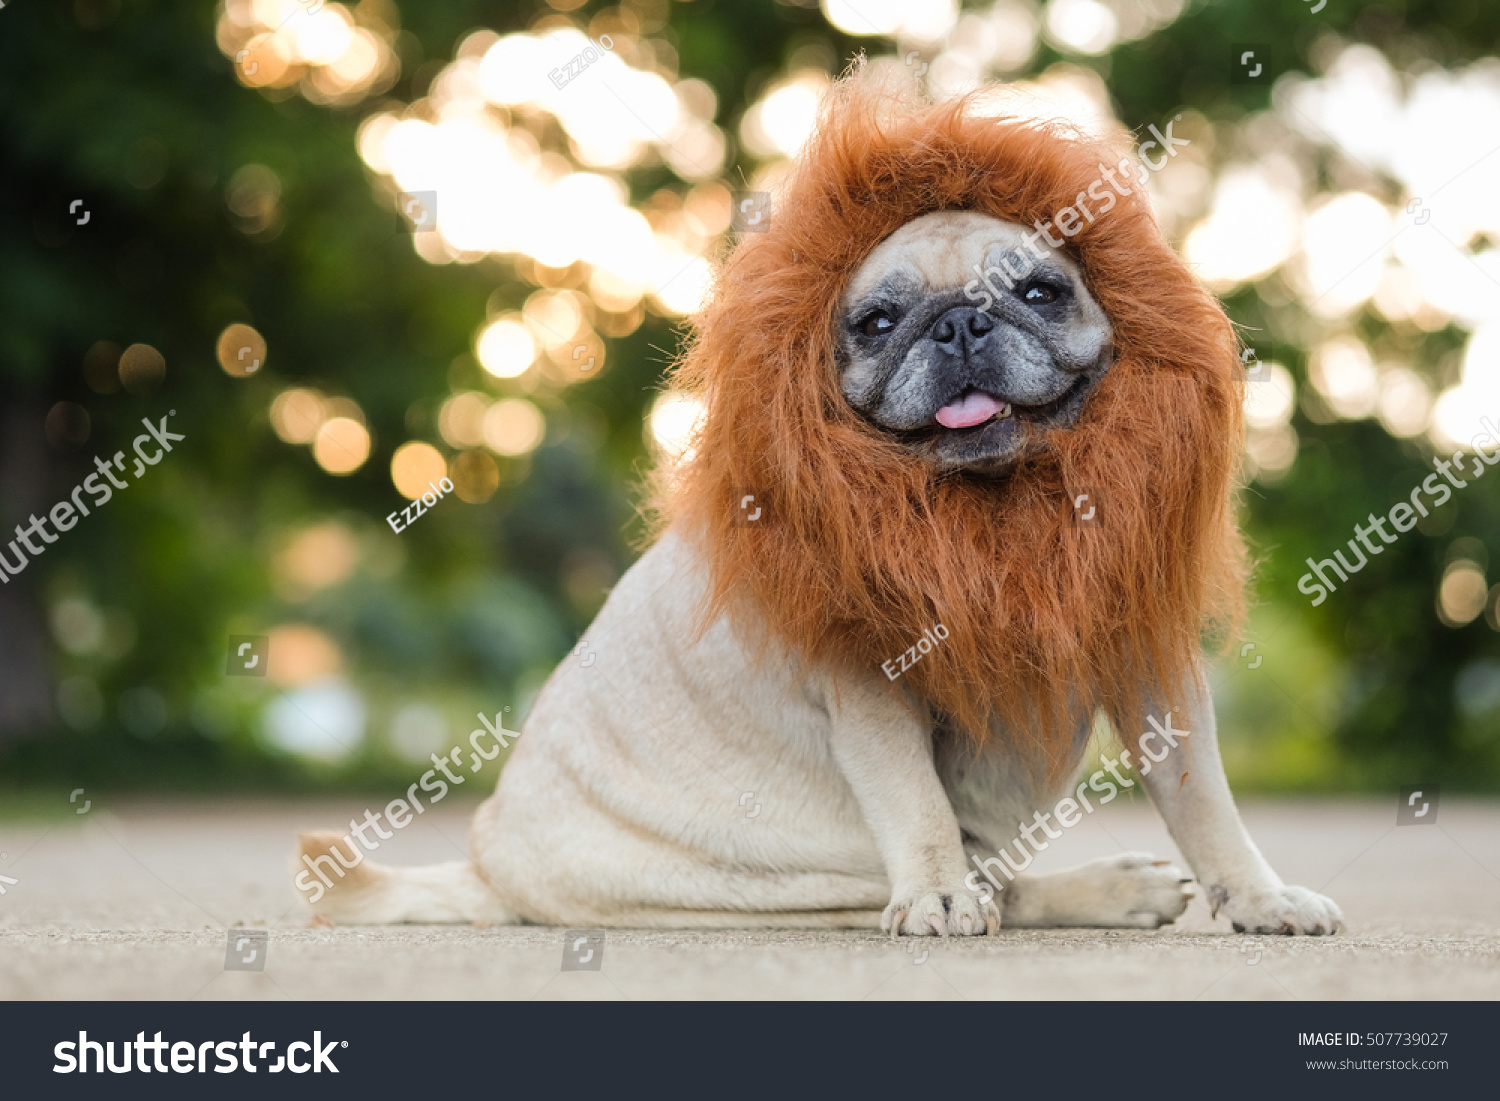 stock-photo-funny-face-of-pug-dog-with-lion-costume-507739027.jpg